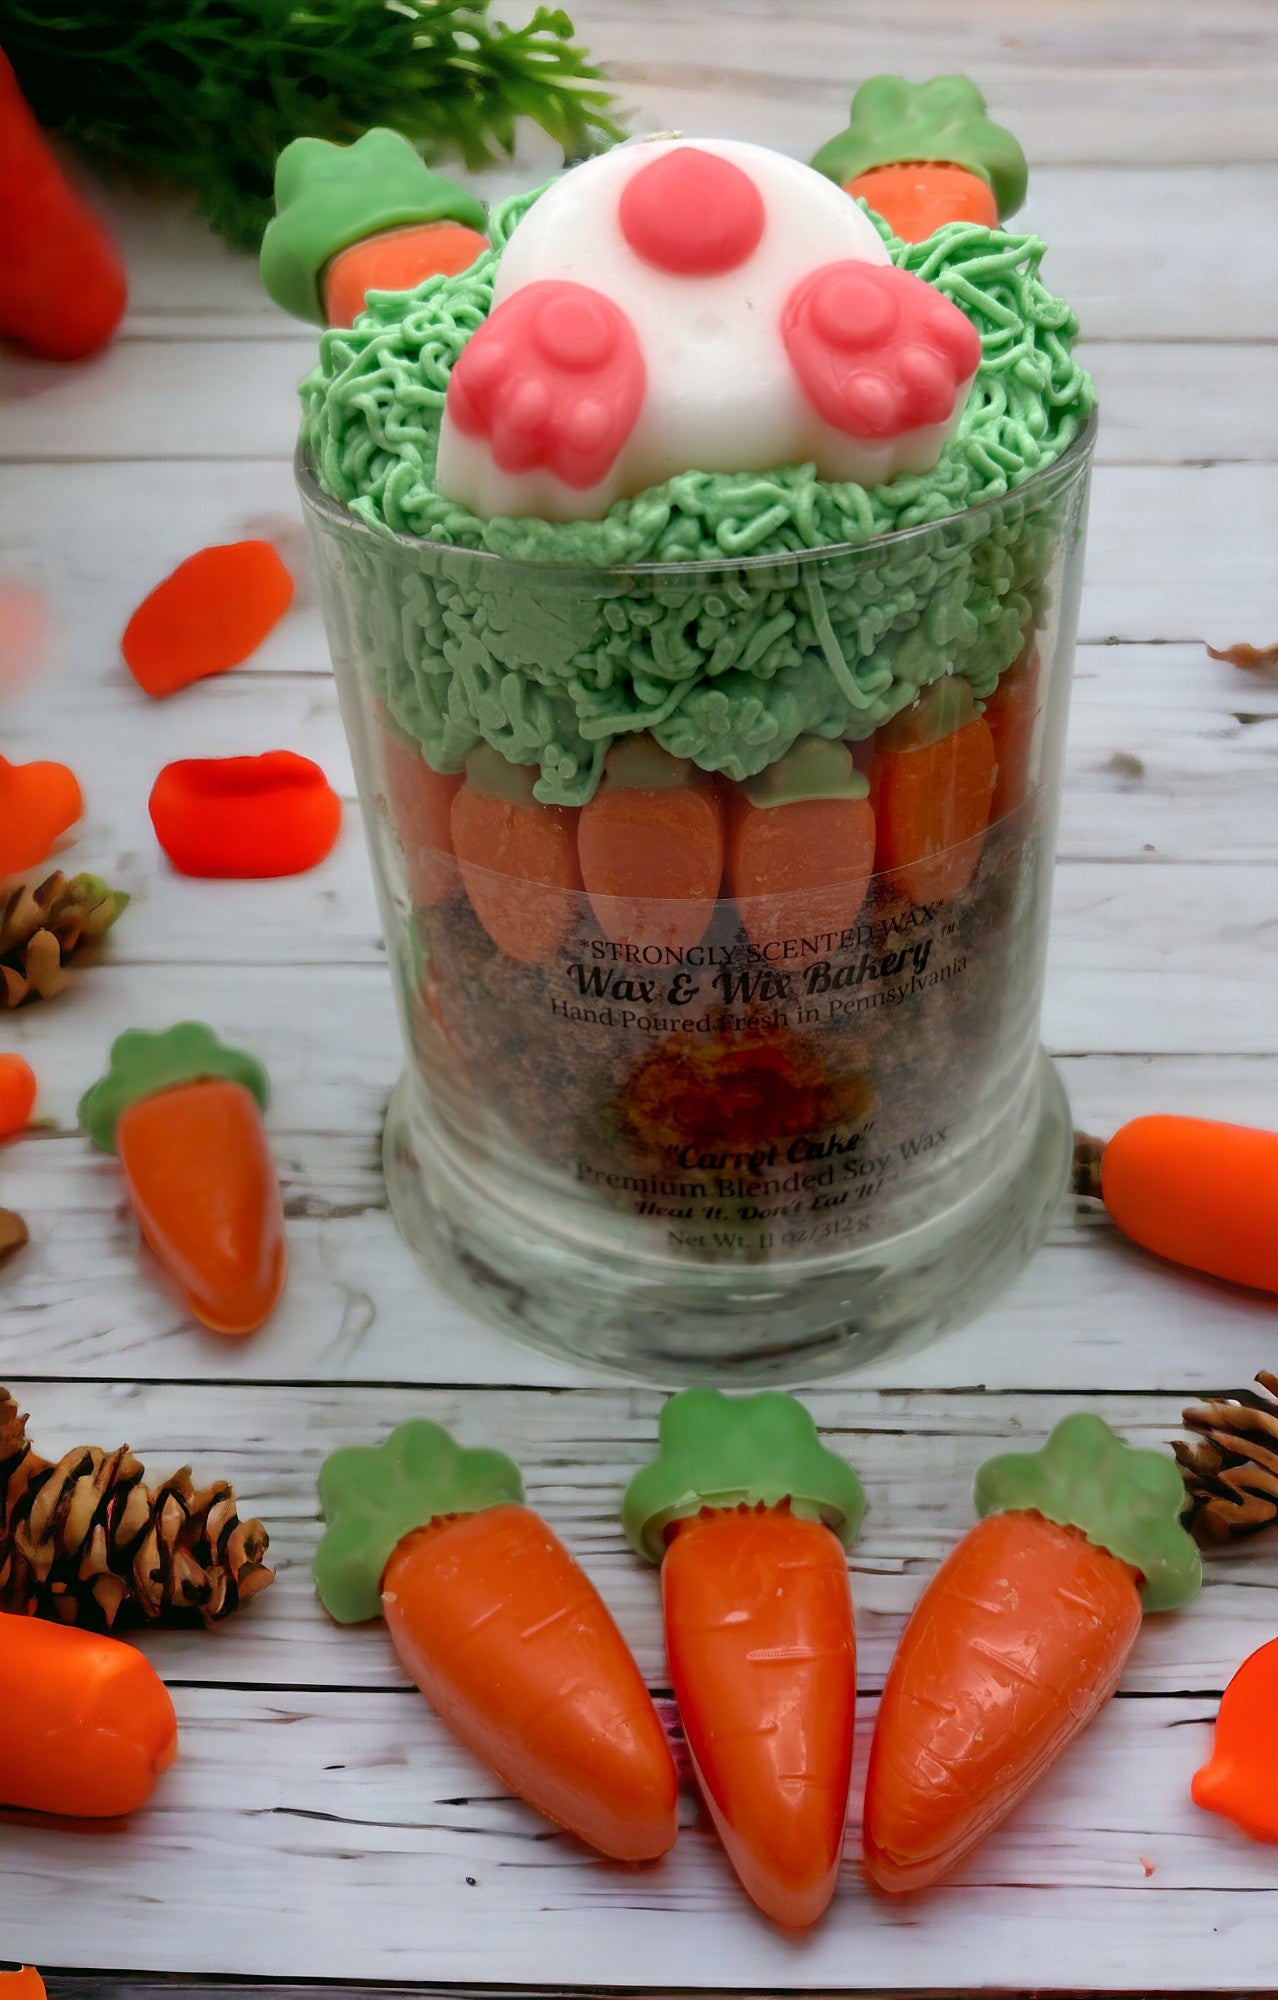 Carrot Cake Candle 11 oz. Soy Candle/Easter Bunny Digging for Carrots. Strongly Scented Candle